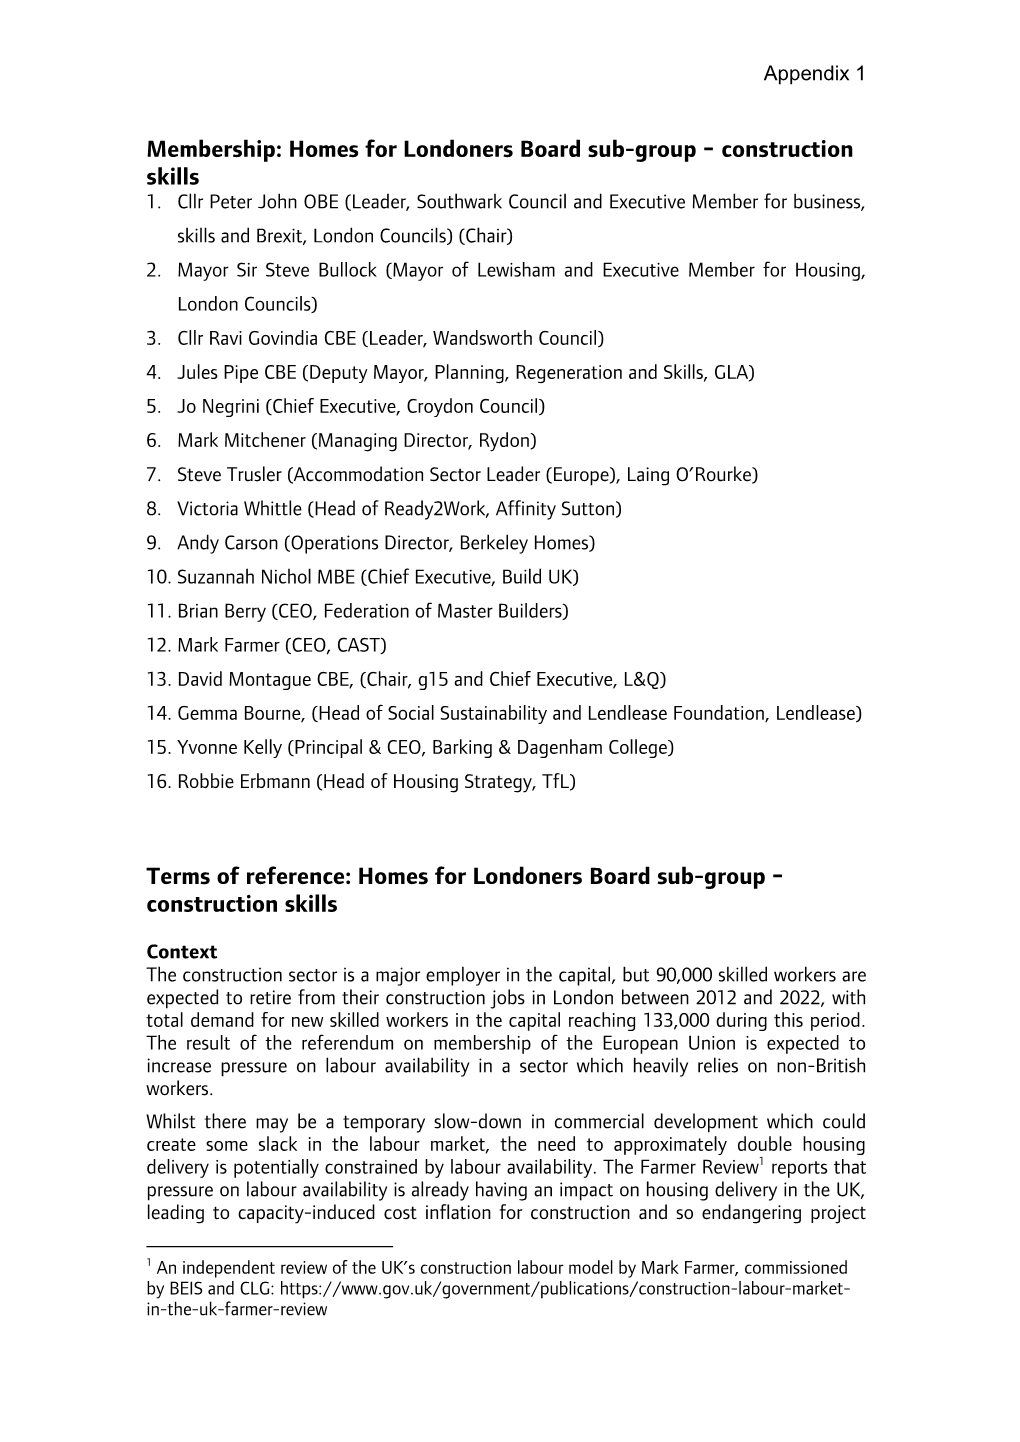 Membership: Homes for Londoners Board Sub-Group - Construction Skills 1